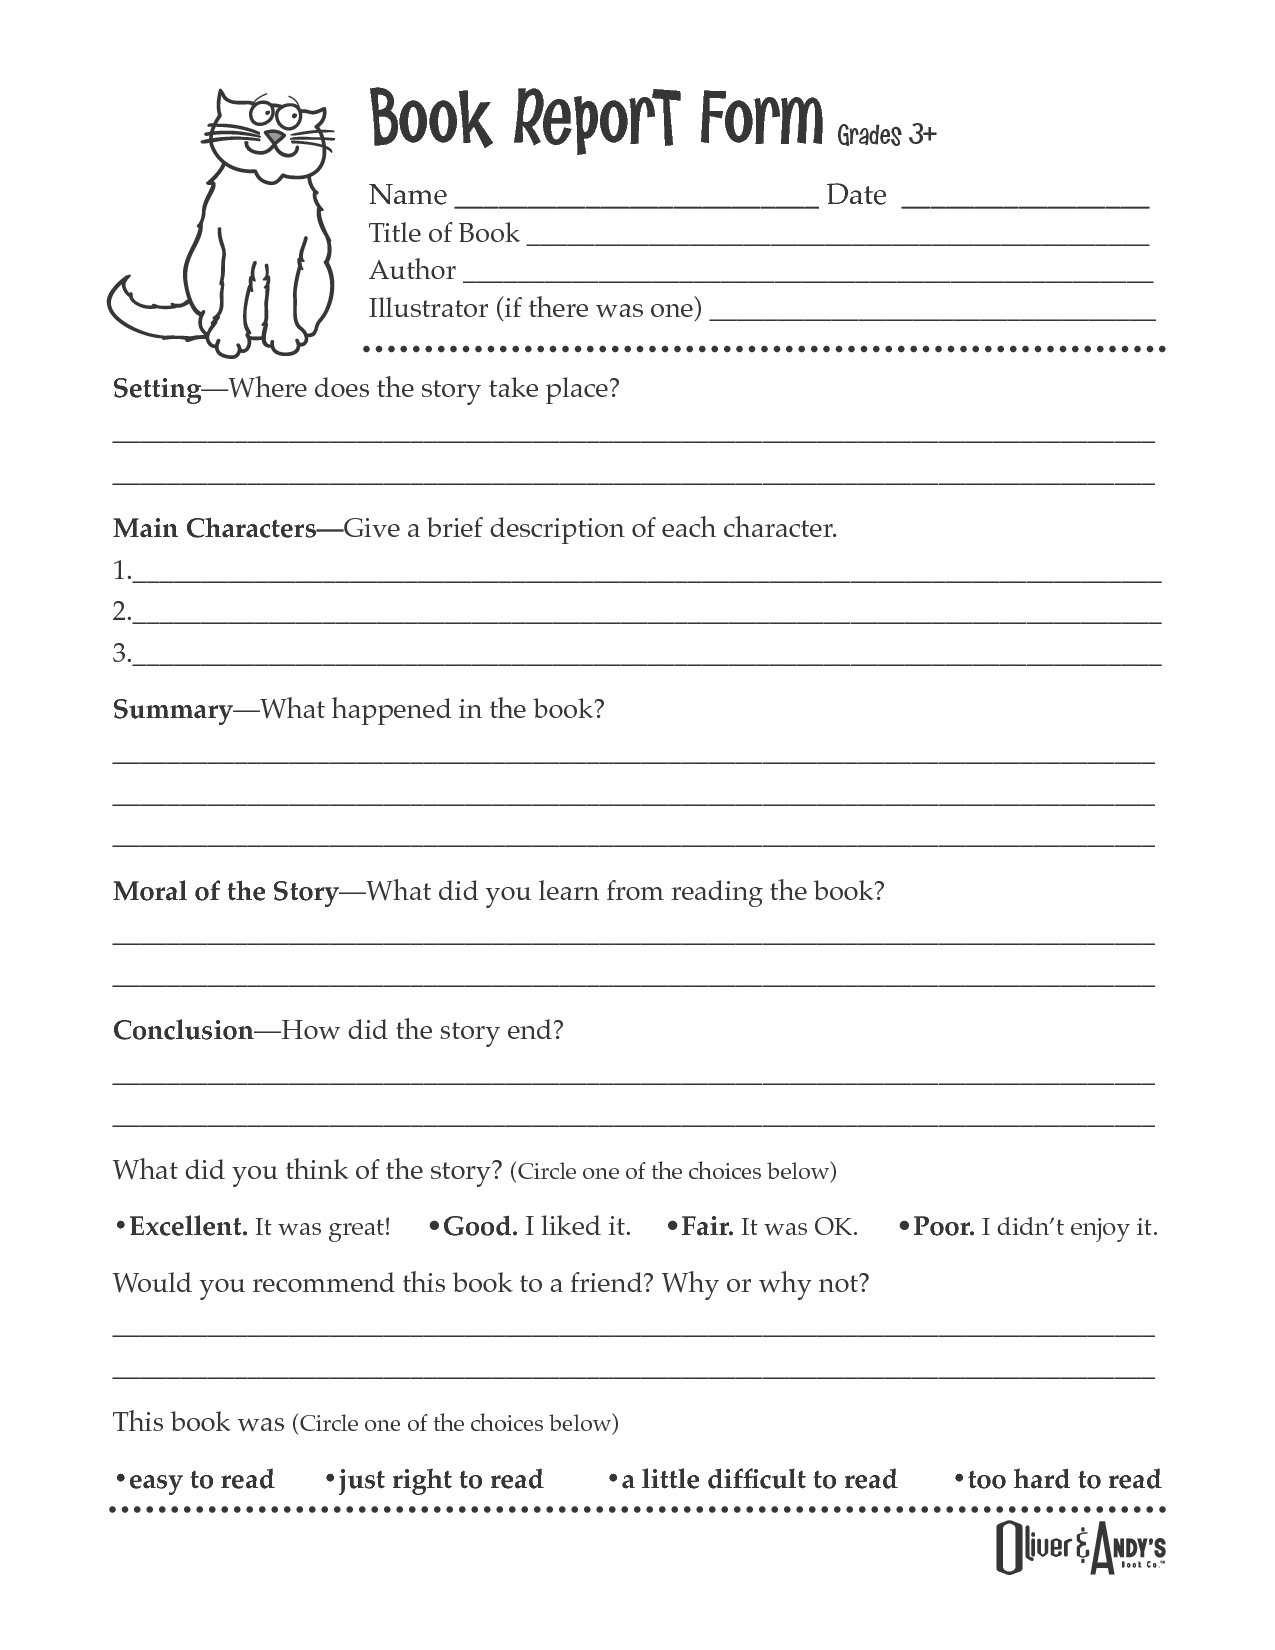 10 Famous Ideas For Books To Write second grade book report template book report form grades 3 2 2023